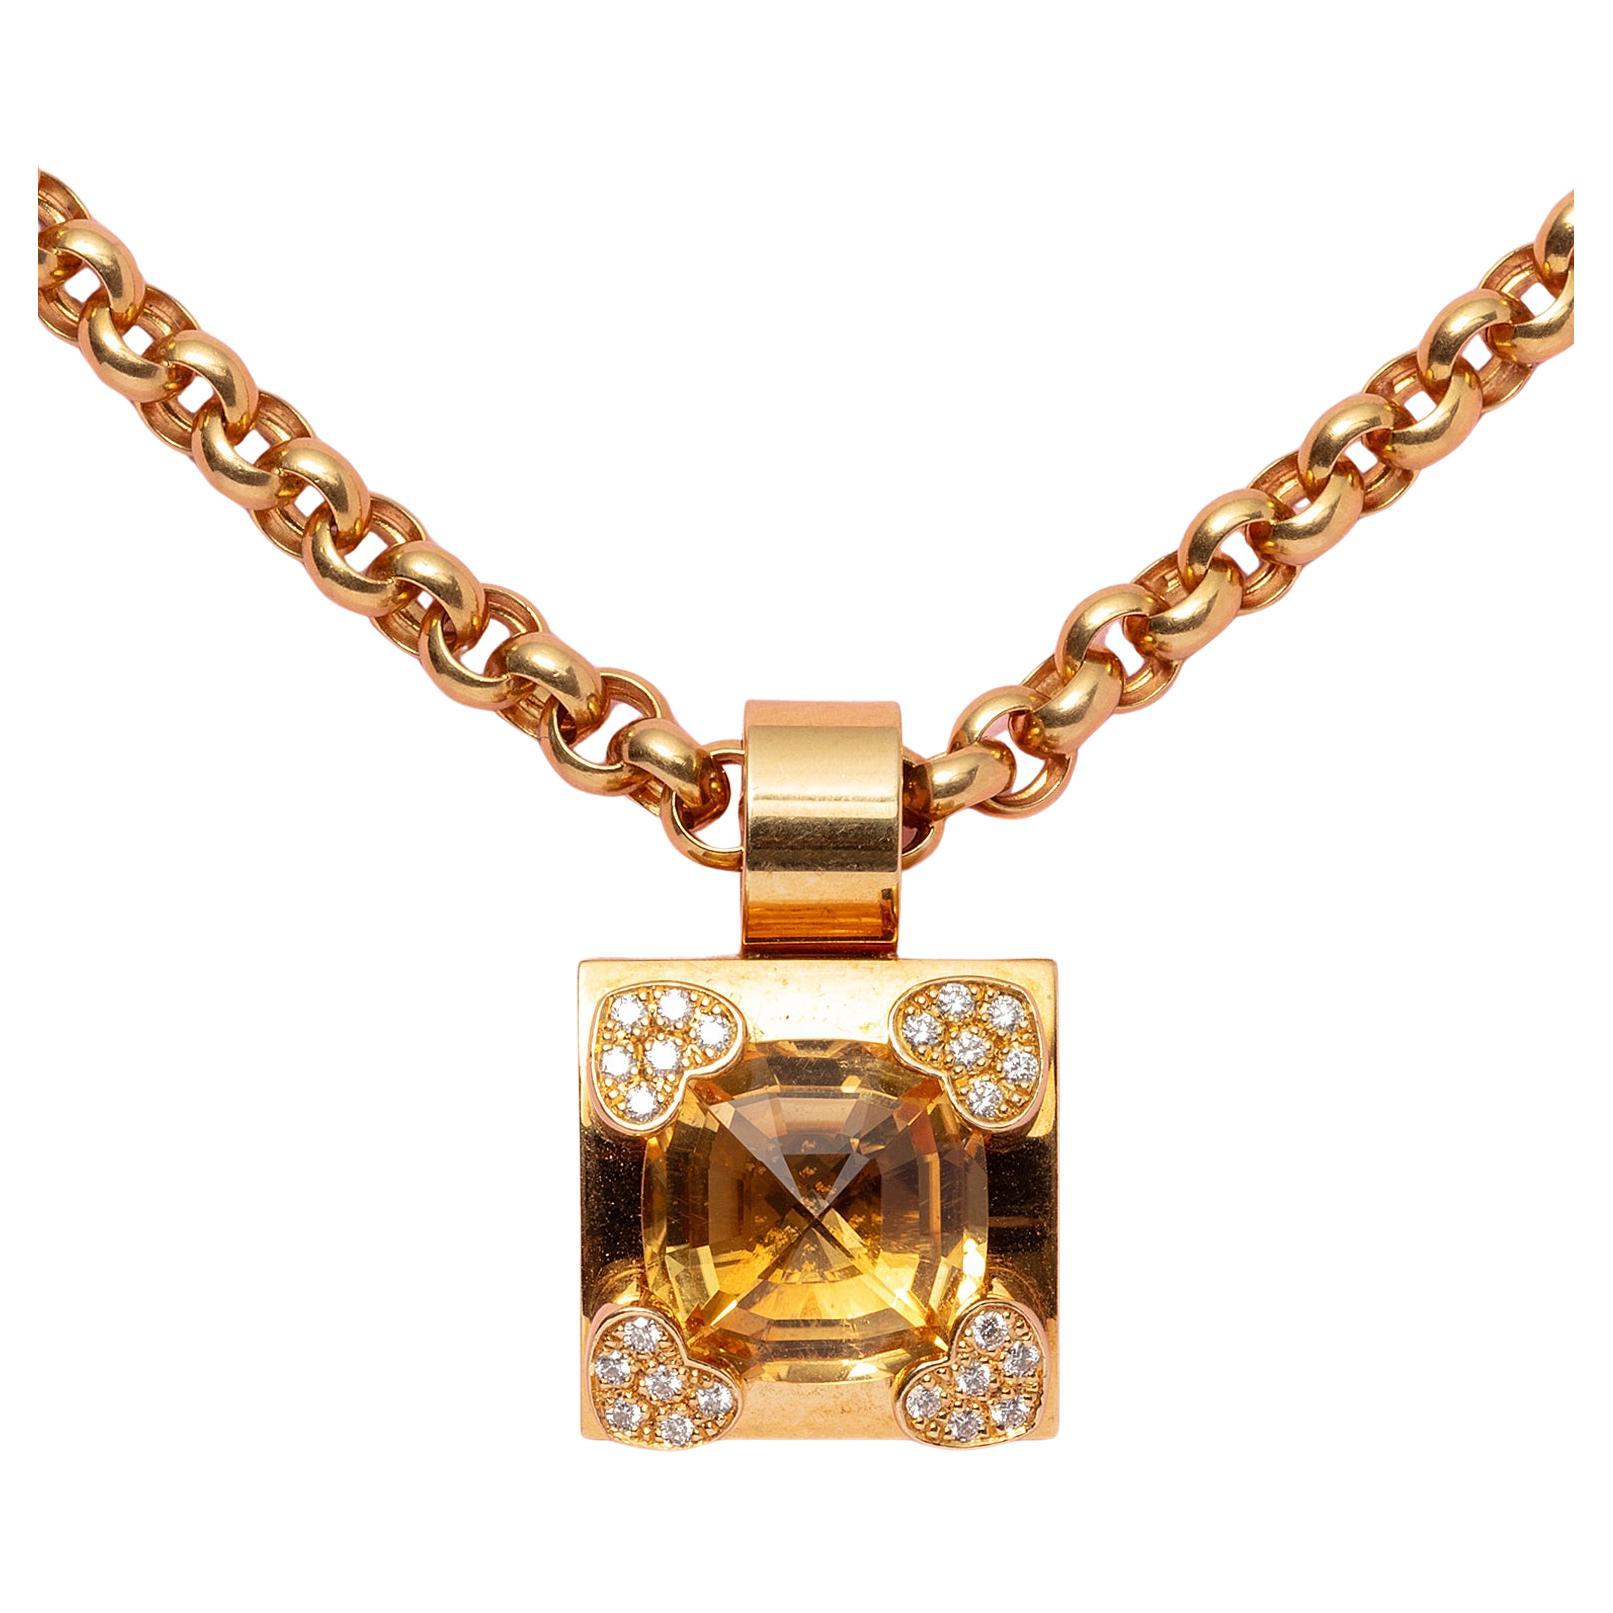 An 18 Carat Gold Citrine and Diamond Chopard Pendant and Chain